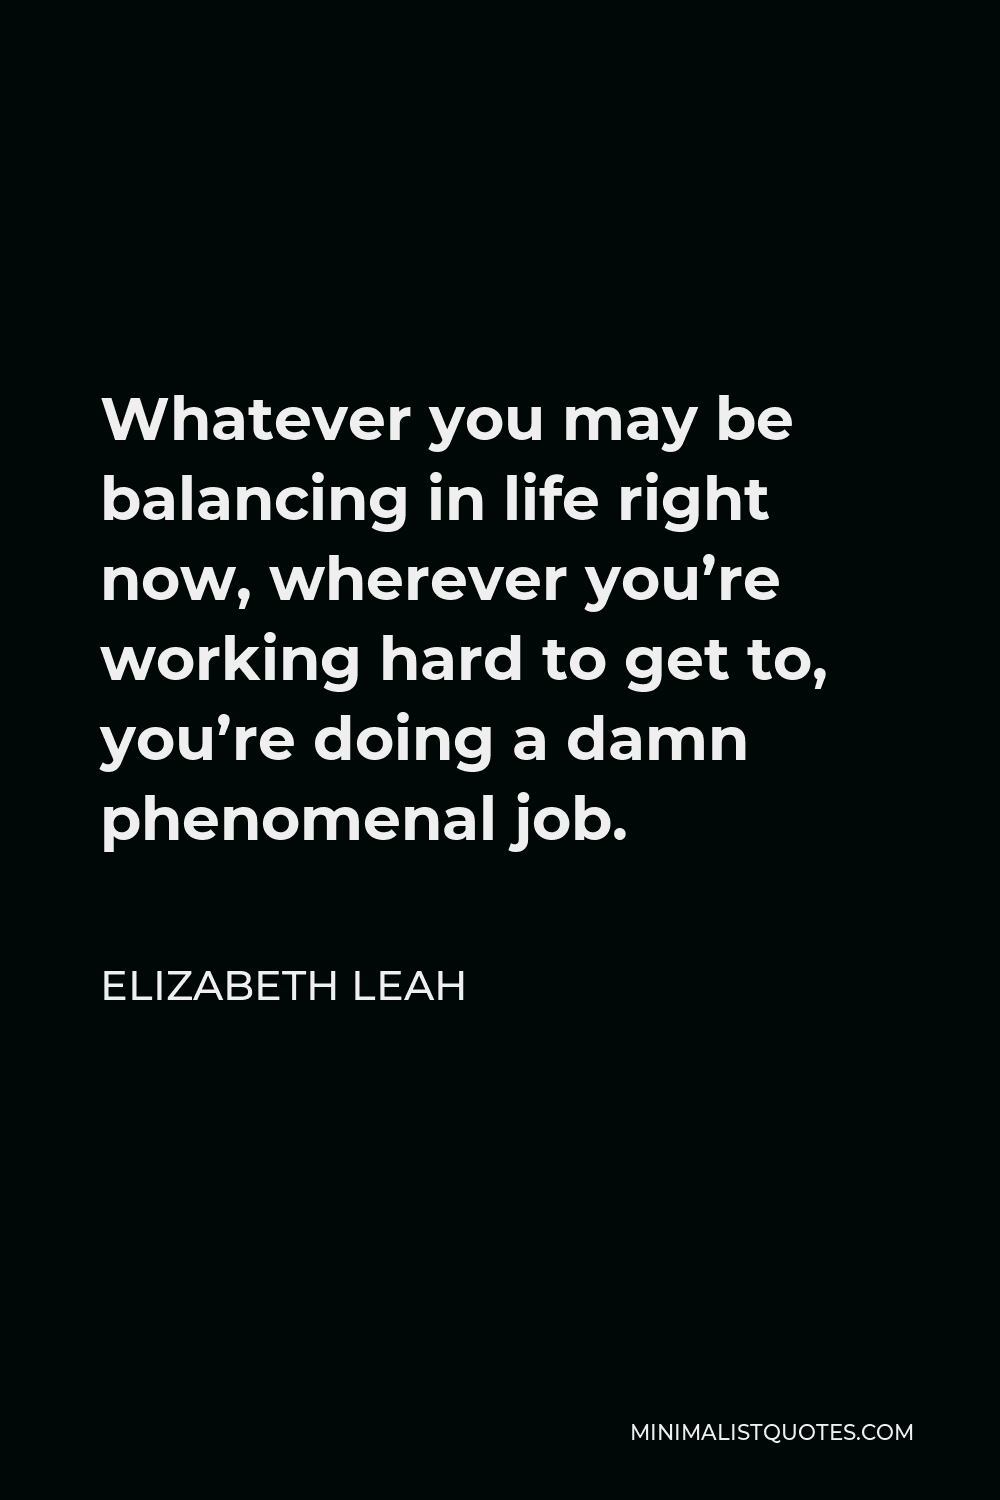 Elizabeth Leah Quote - Whatever you may be balancing in life right now, wherever you’re working hard to get to, you’re doing a damn phenomenal job.